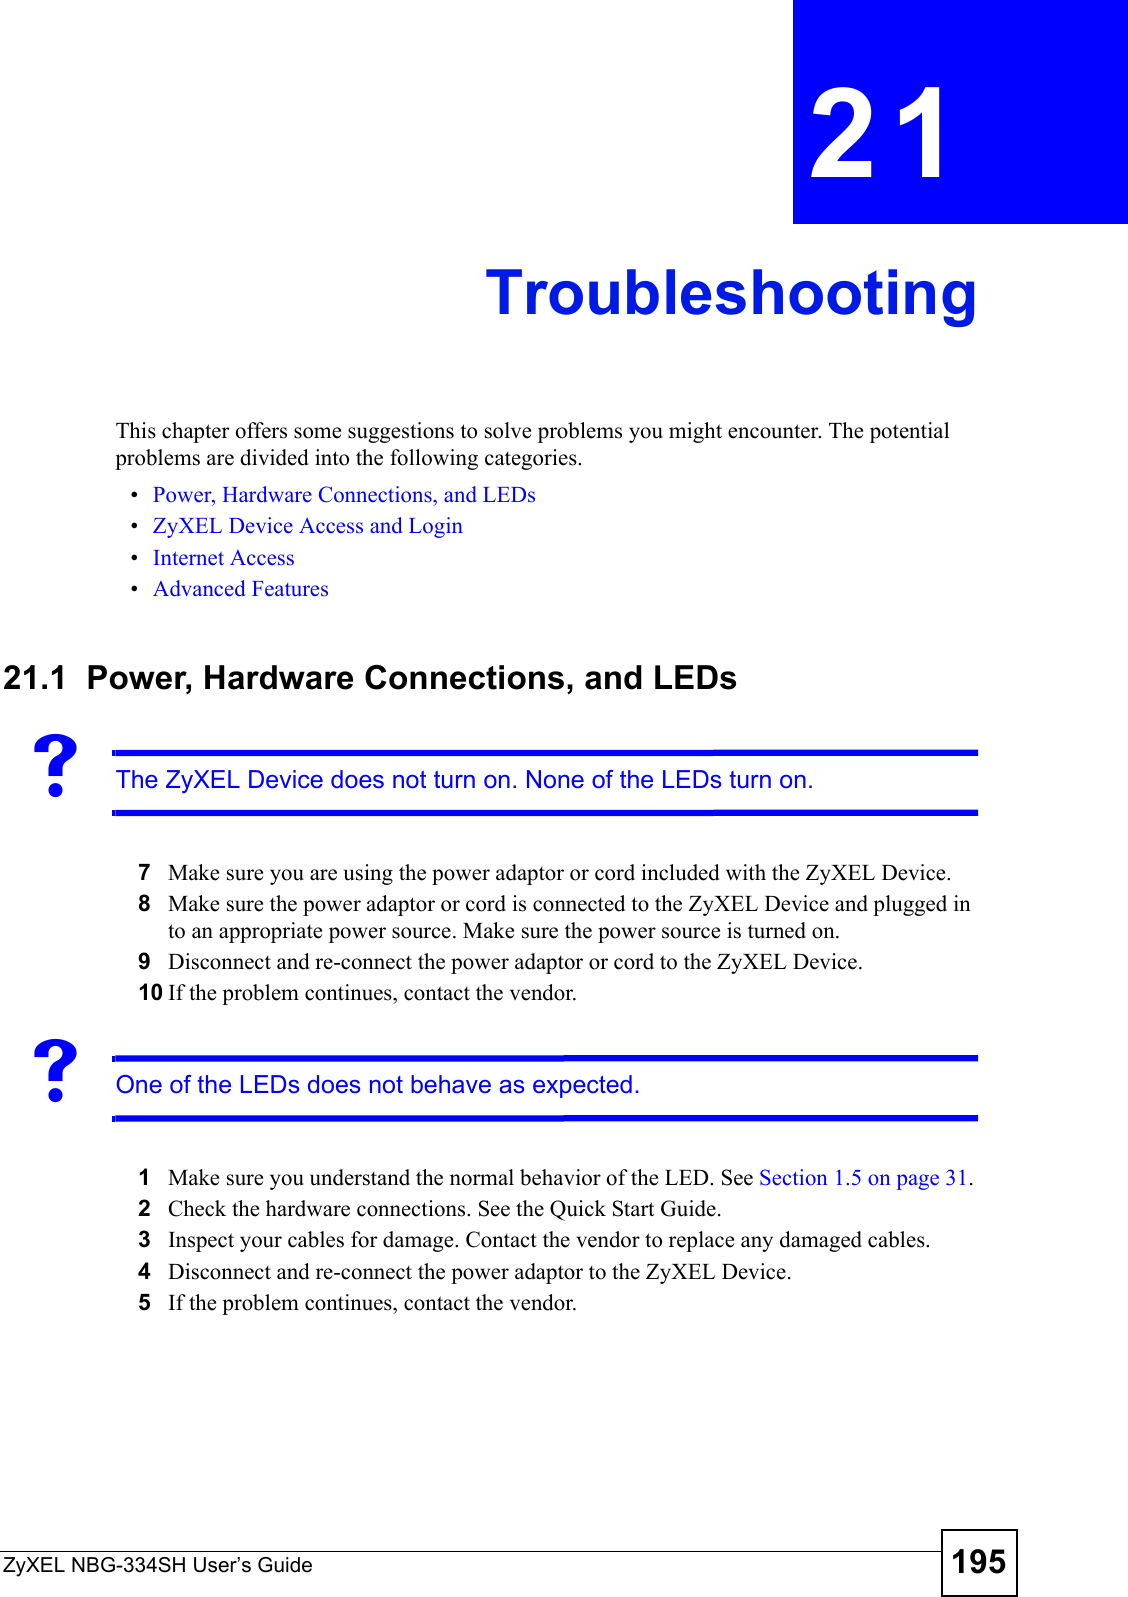 ZyXEL NBG-334SH User’s Guide 195CHAPTER  21 TroubleshootingThis chapter offers some suggestions to solve problems you might encounter. The potential problems are divided into the following categories. •Power, Hardware Connections, and LEDs•ZyXEL Device Access and Login•Internet Access•Advanced Features21.1  Power, Hardware Connections, and LEDsVThe ZyXEL Device does not turn on. None of the LEDs turn on.7Make sure you are using the power adaptor or cord included with the ZyXEL Device.8Make sure the power adaptor or cord is connected to the ZyXEL Device and plugged in to an appropriate power source. Make sure the power source is turned on.9Disconnect and re-connect the power adaptor or cord to the ZyXEL Device. 10 If the problem continues, contact the vendor.VOne of the LEDs does not behave as expected.1Make sure you understand the normal behavior of the LED. See Section 1.5 on page 31.2Check the hardware connections. See the Quick Start Guide. 3Inspect your cables for damage. Contact the vendor to replace any damaged cables.4Disconnect and re-connect the power adaptor to the ZyXEL Device. 5If the problem continues, contact the vendor.